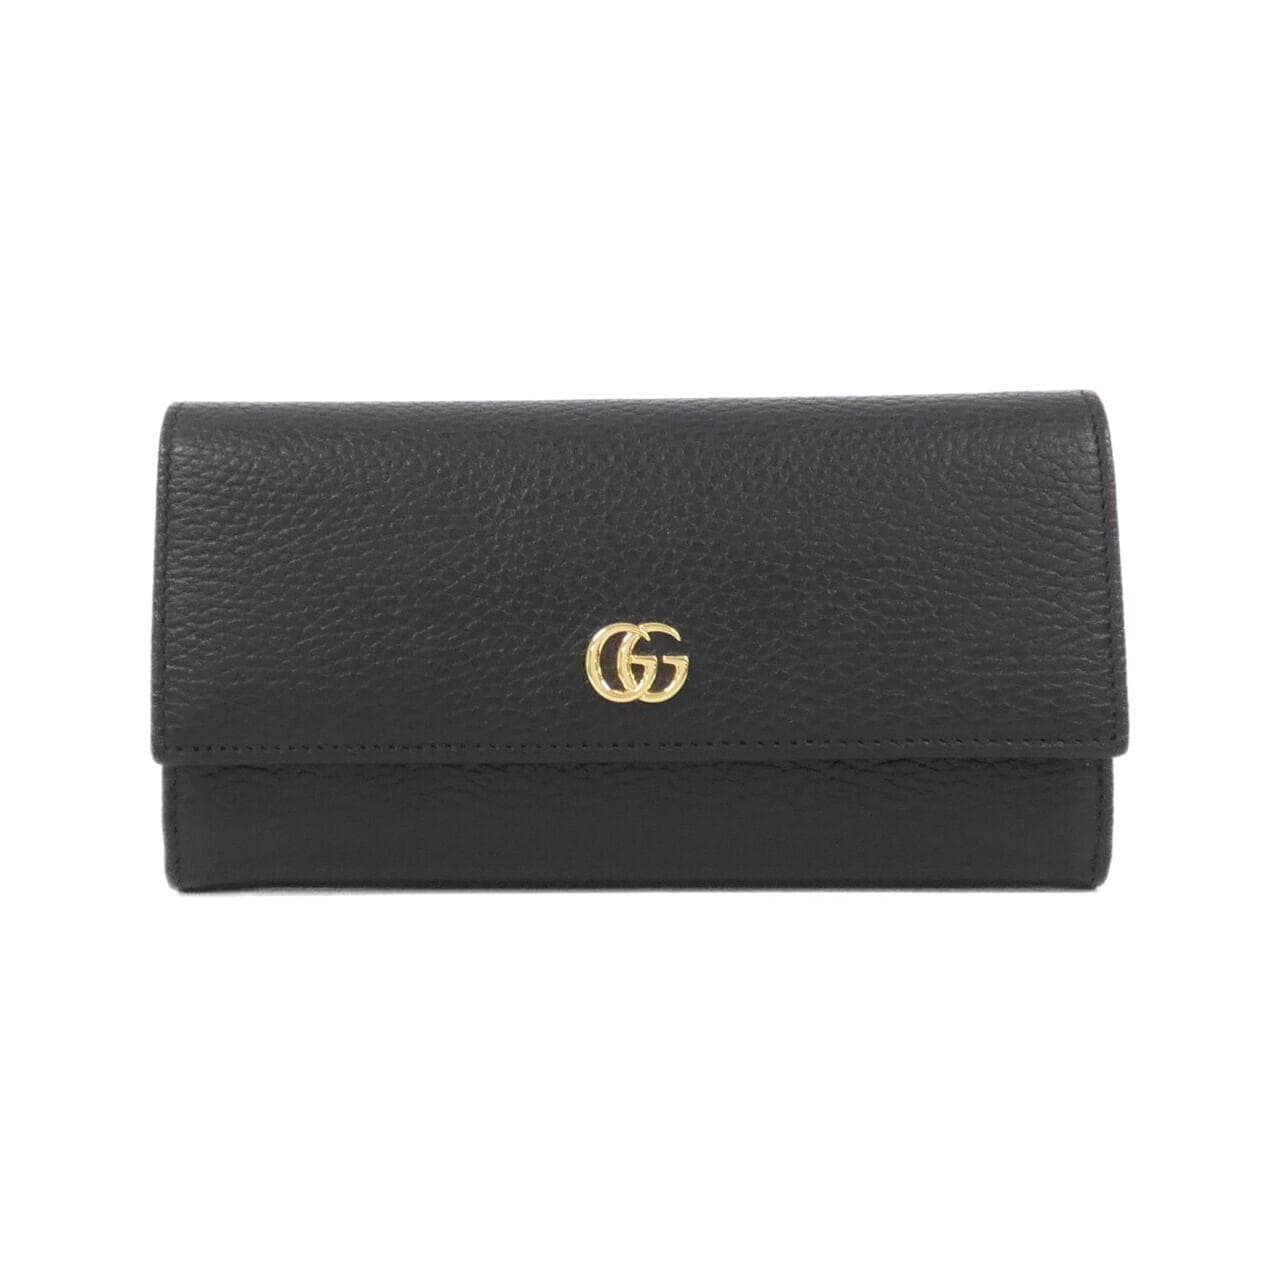 [Unused items] Gucci PETIT MARMONT 456116 AAC1P wallet